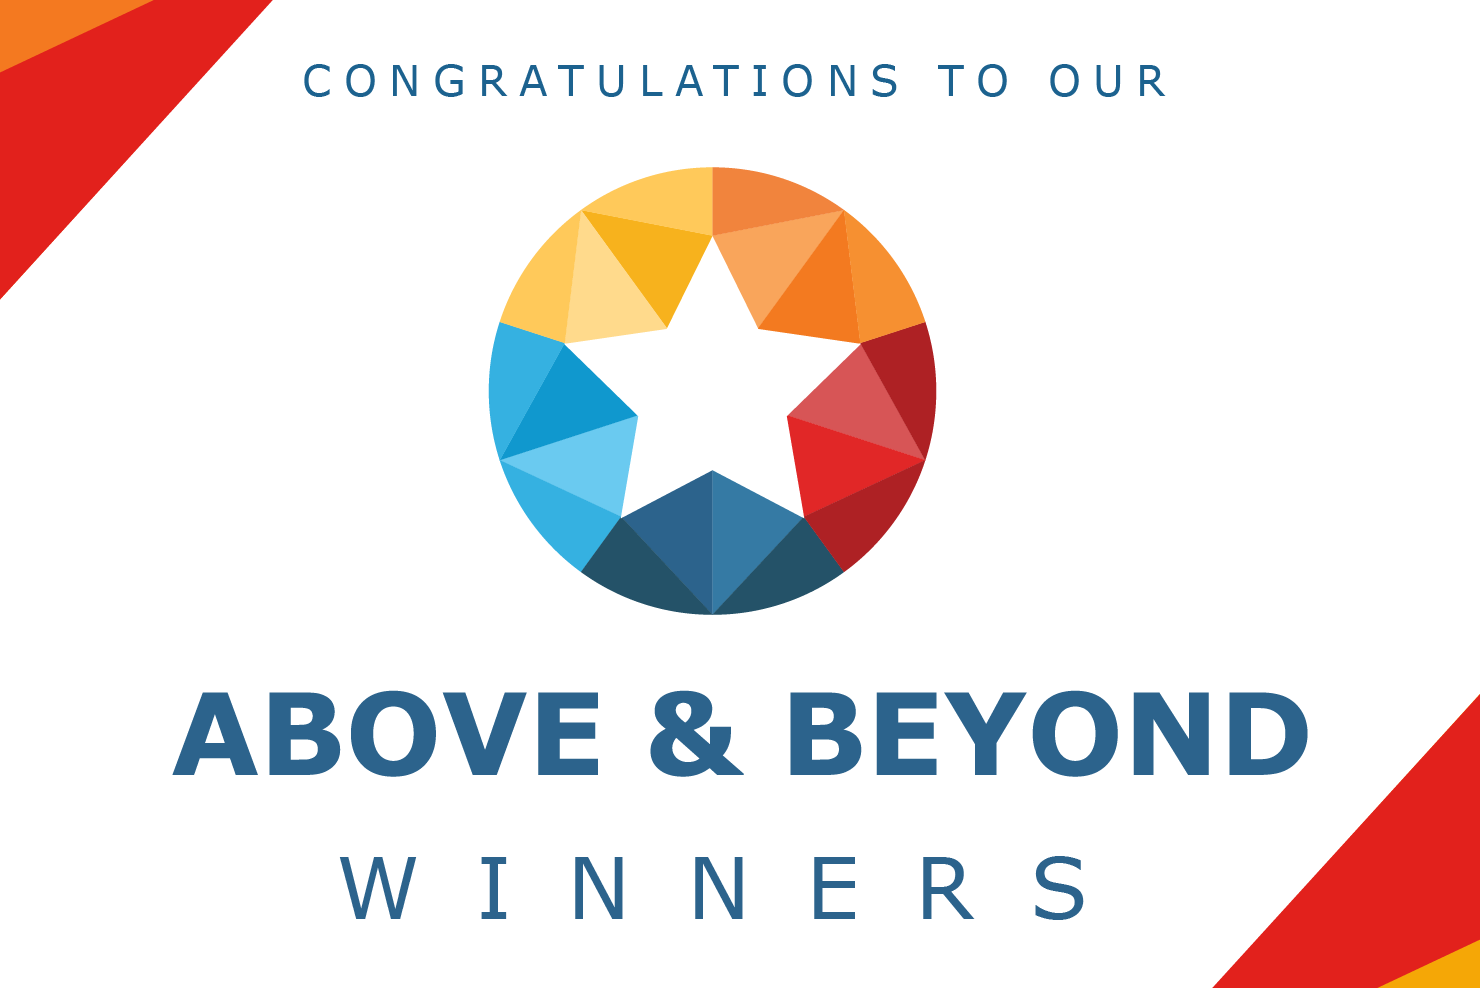 Congratulations to our Above & Beyond winners